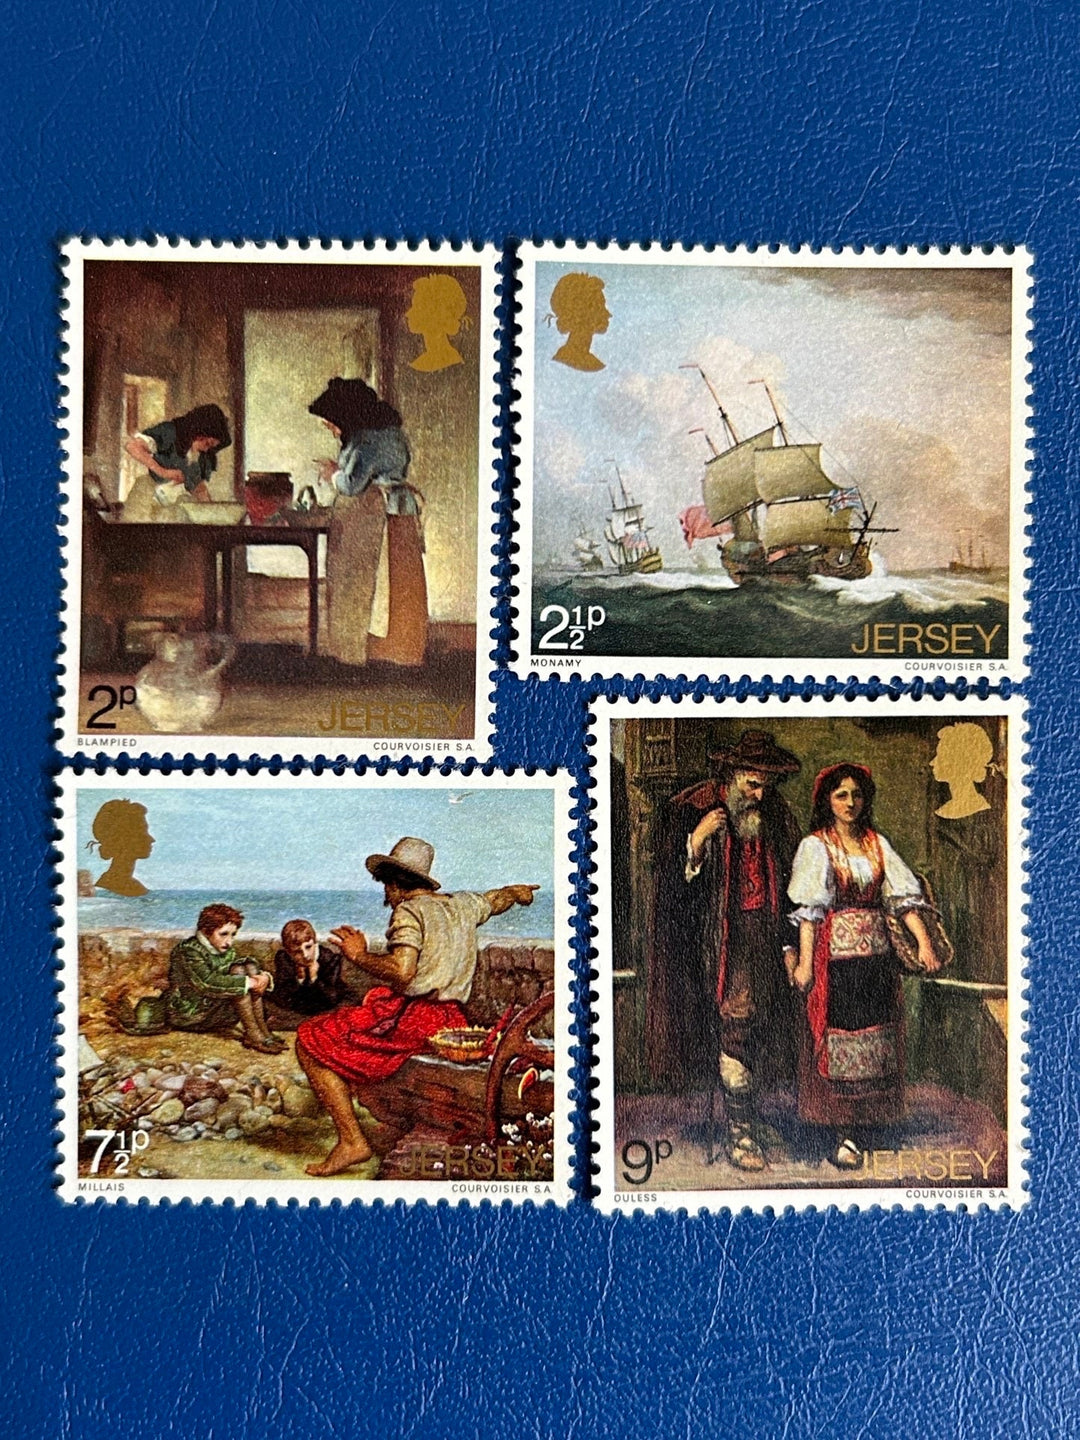 Jersey - Original Vintage Postage Stamps - 1971 Paintings by Jersey Artists - for the collector, artist or crafter